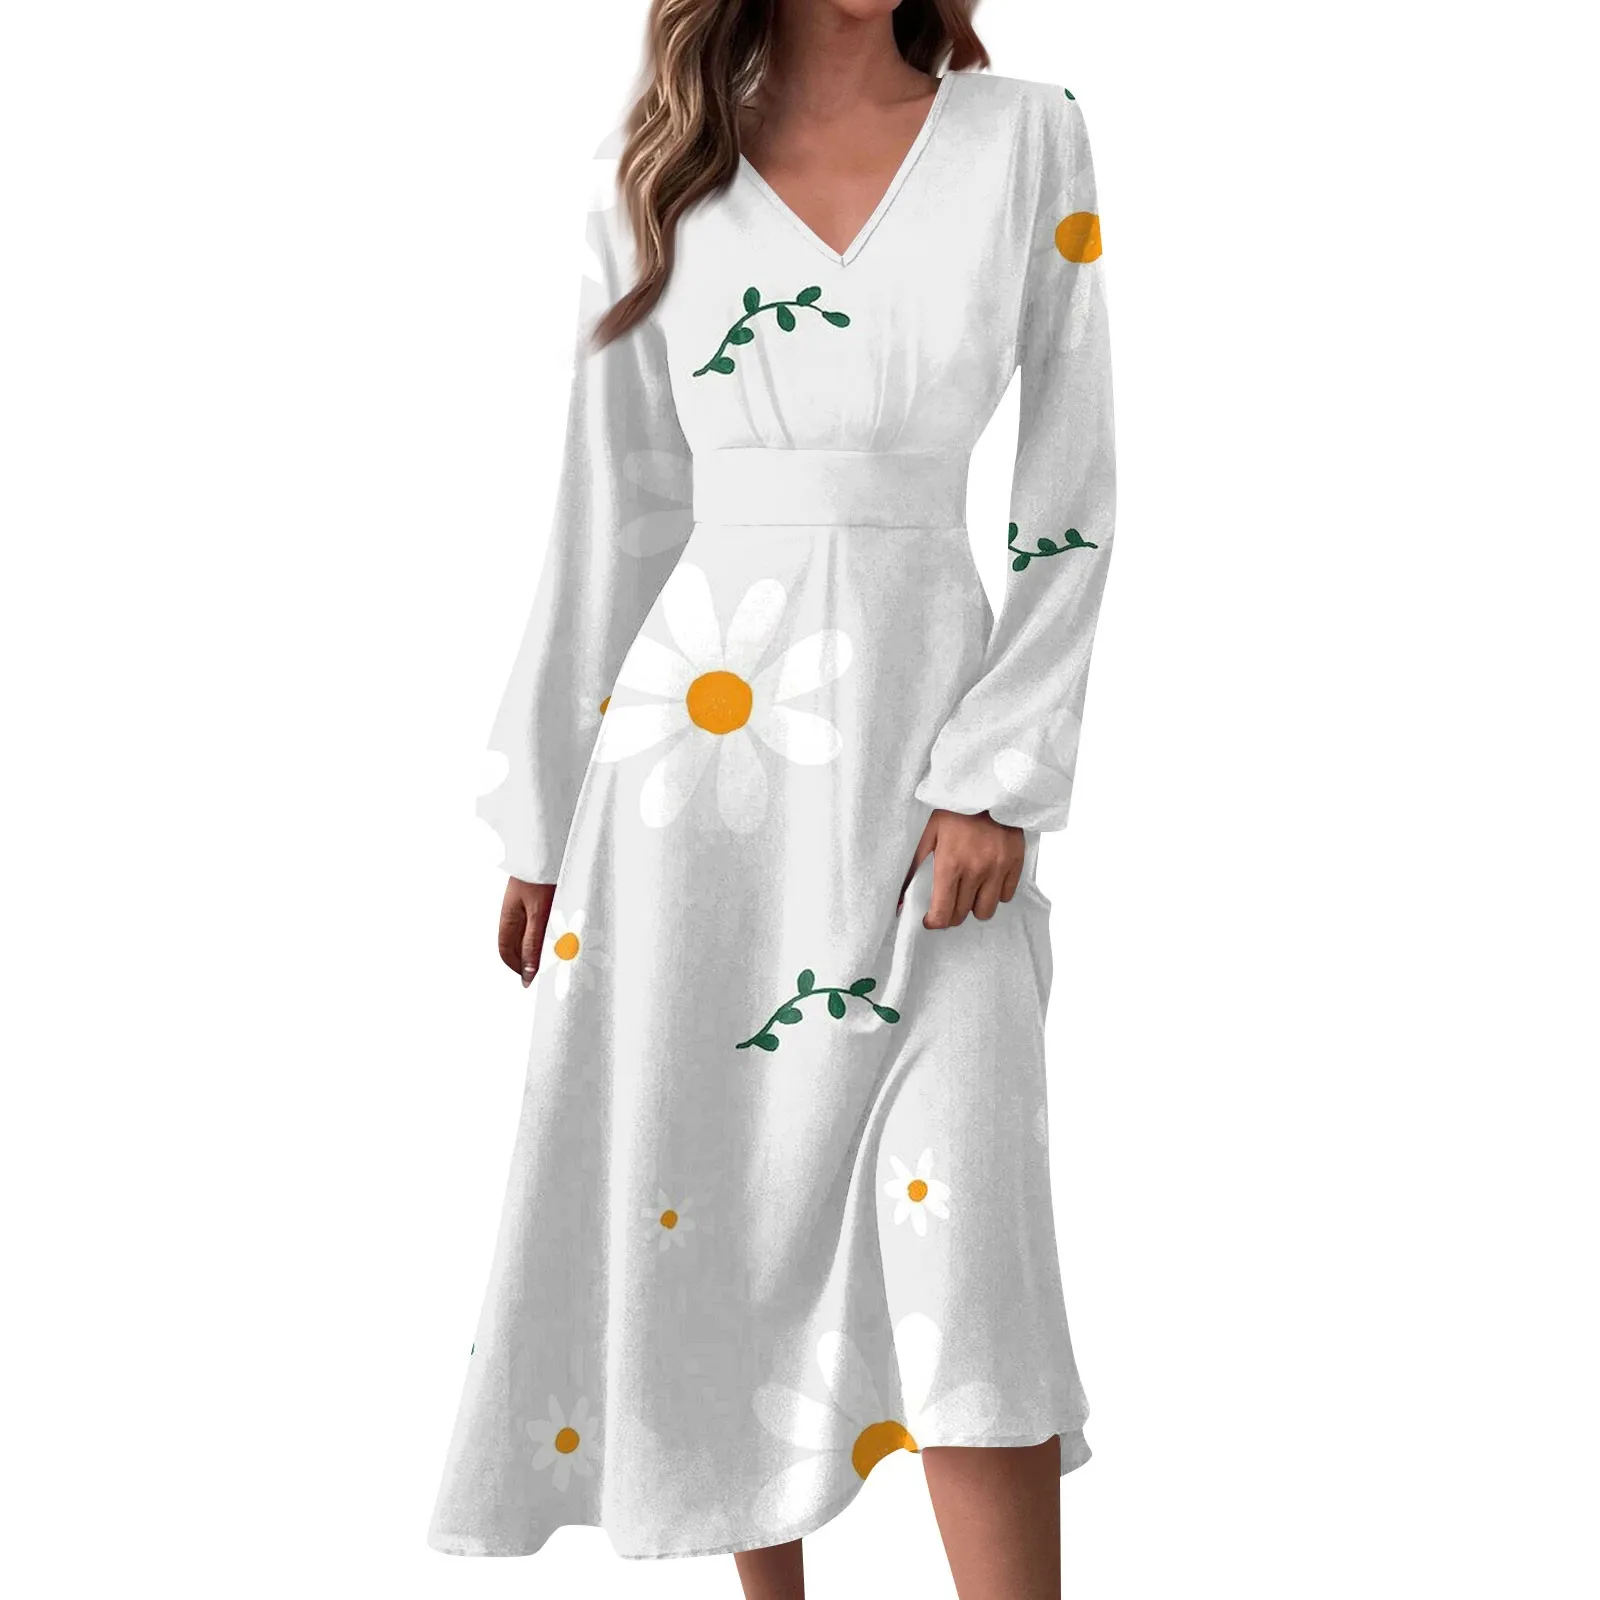 

Women's Spring And Autumn Casual Fashion V-neck Long Sleeve Floral Printed Long Dresses Women Fashion faldas 롱스커트